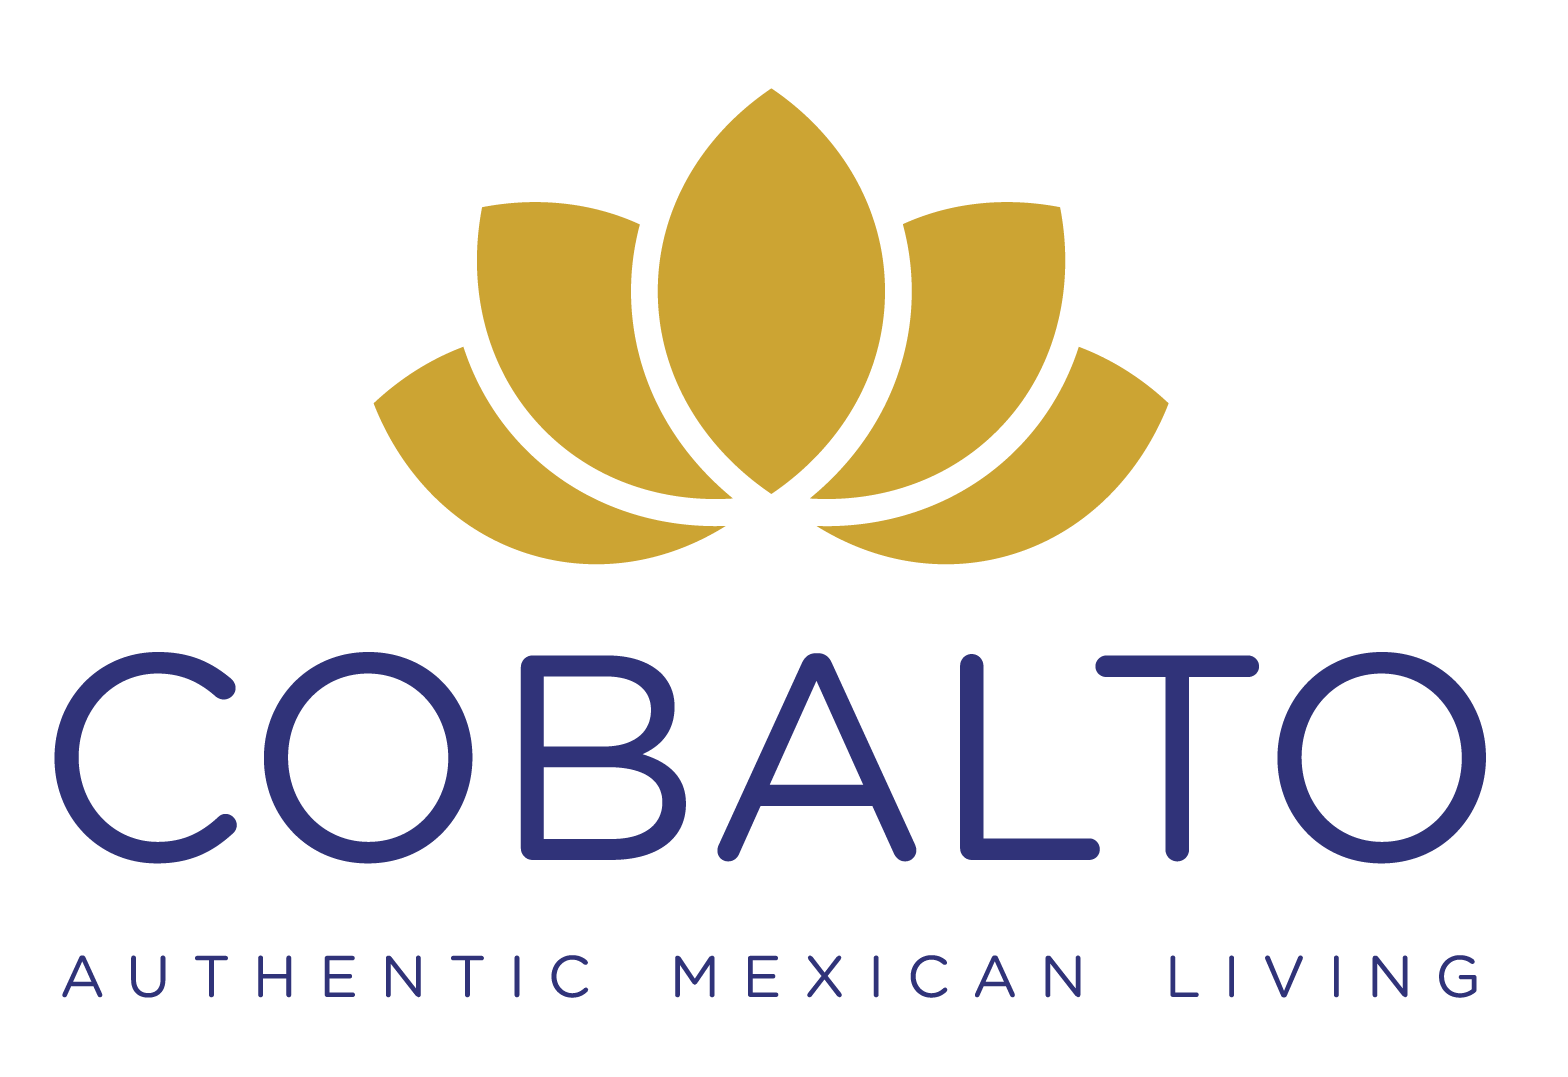 COBALTO - Authentic Mexican Living